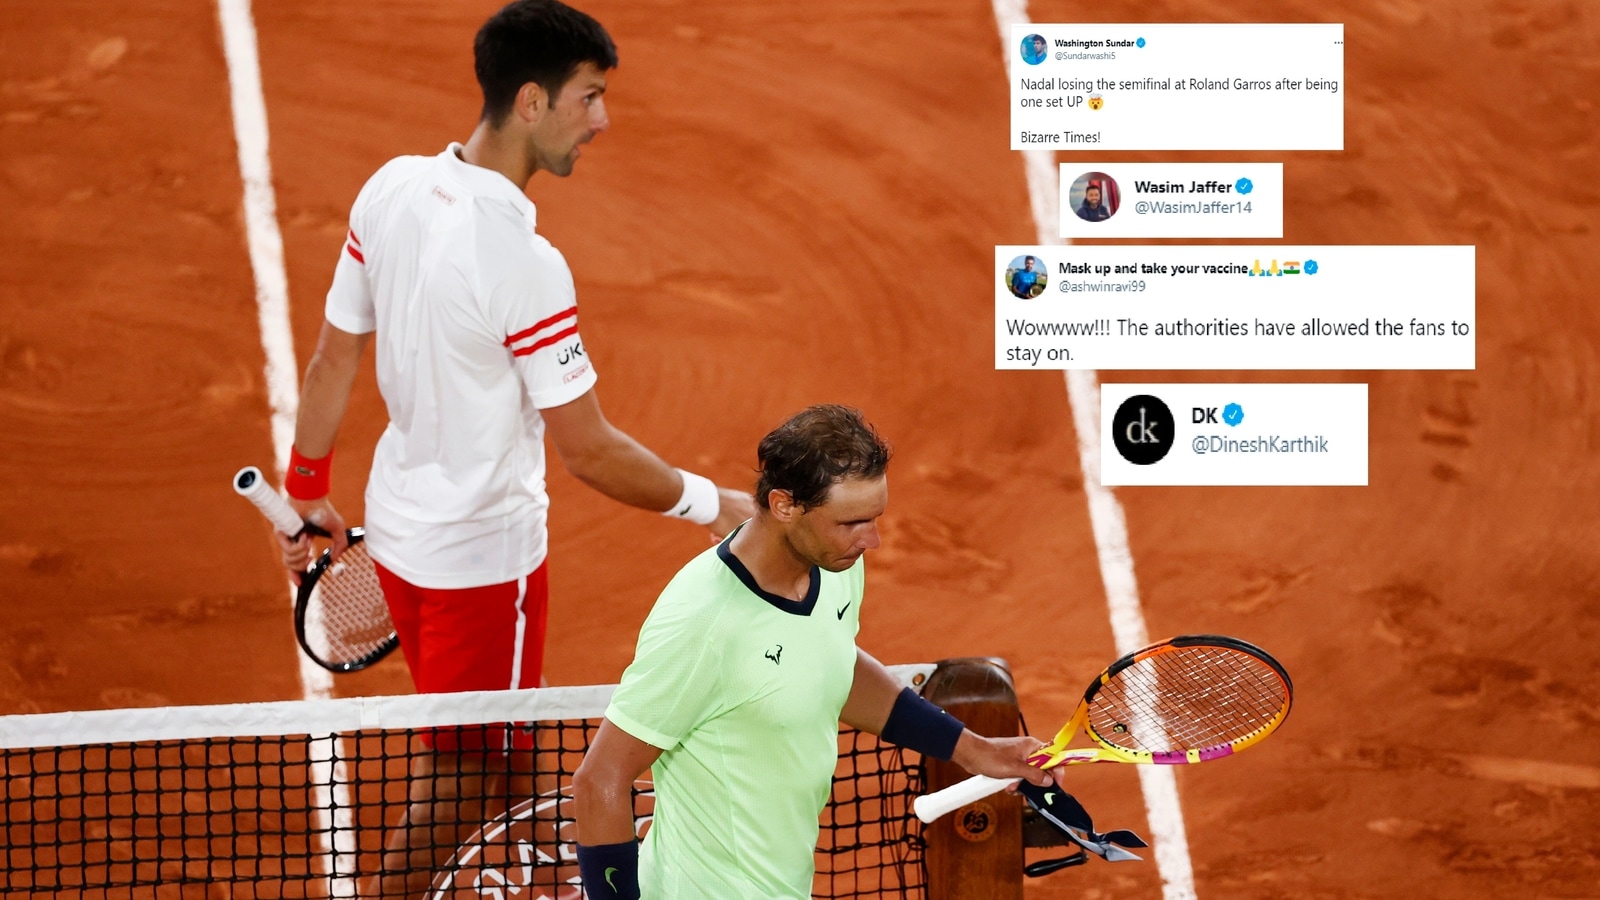 Bizarre Times Indian cricketers react to epic French Open semi-final between Djokovic and Nadal Tennis News